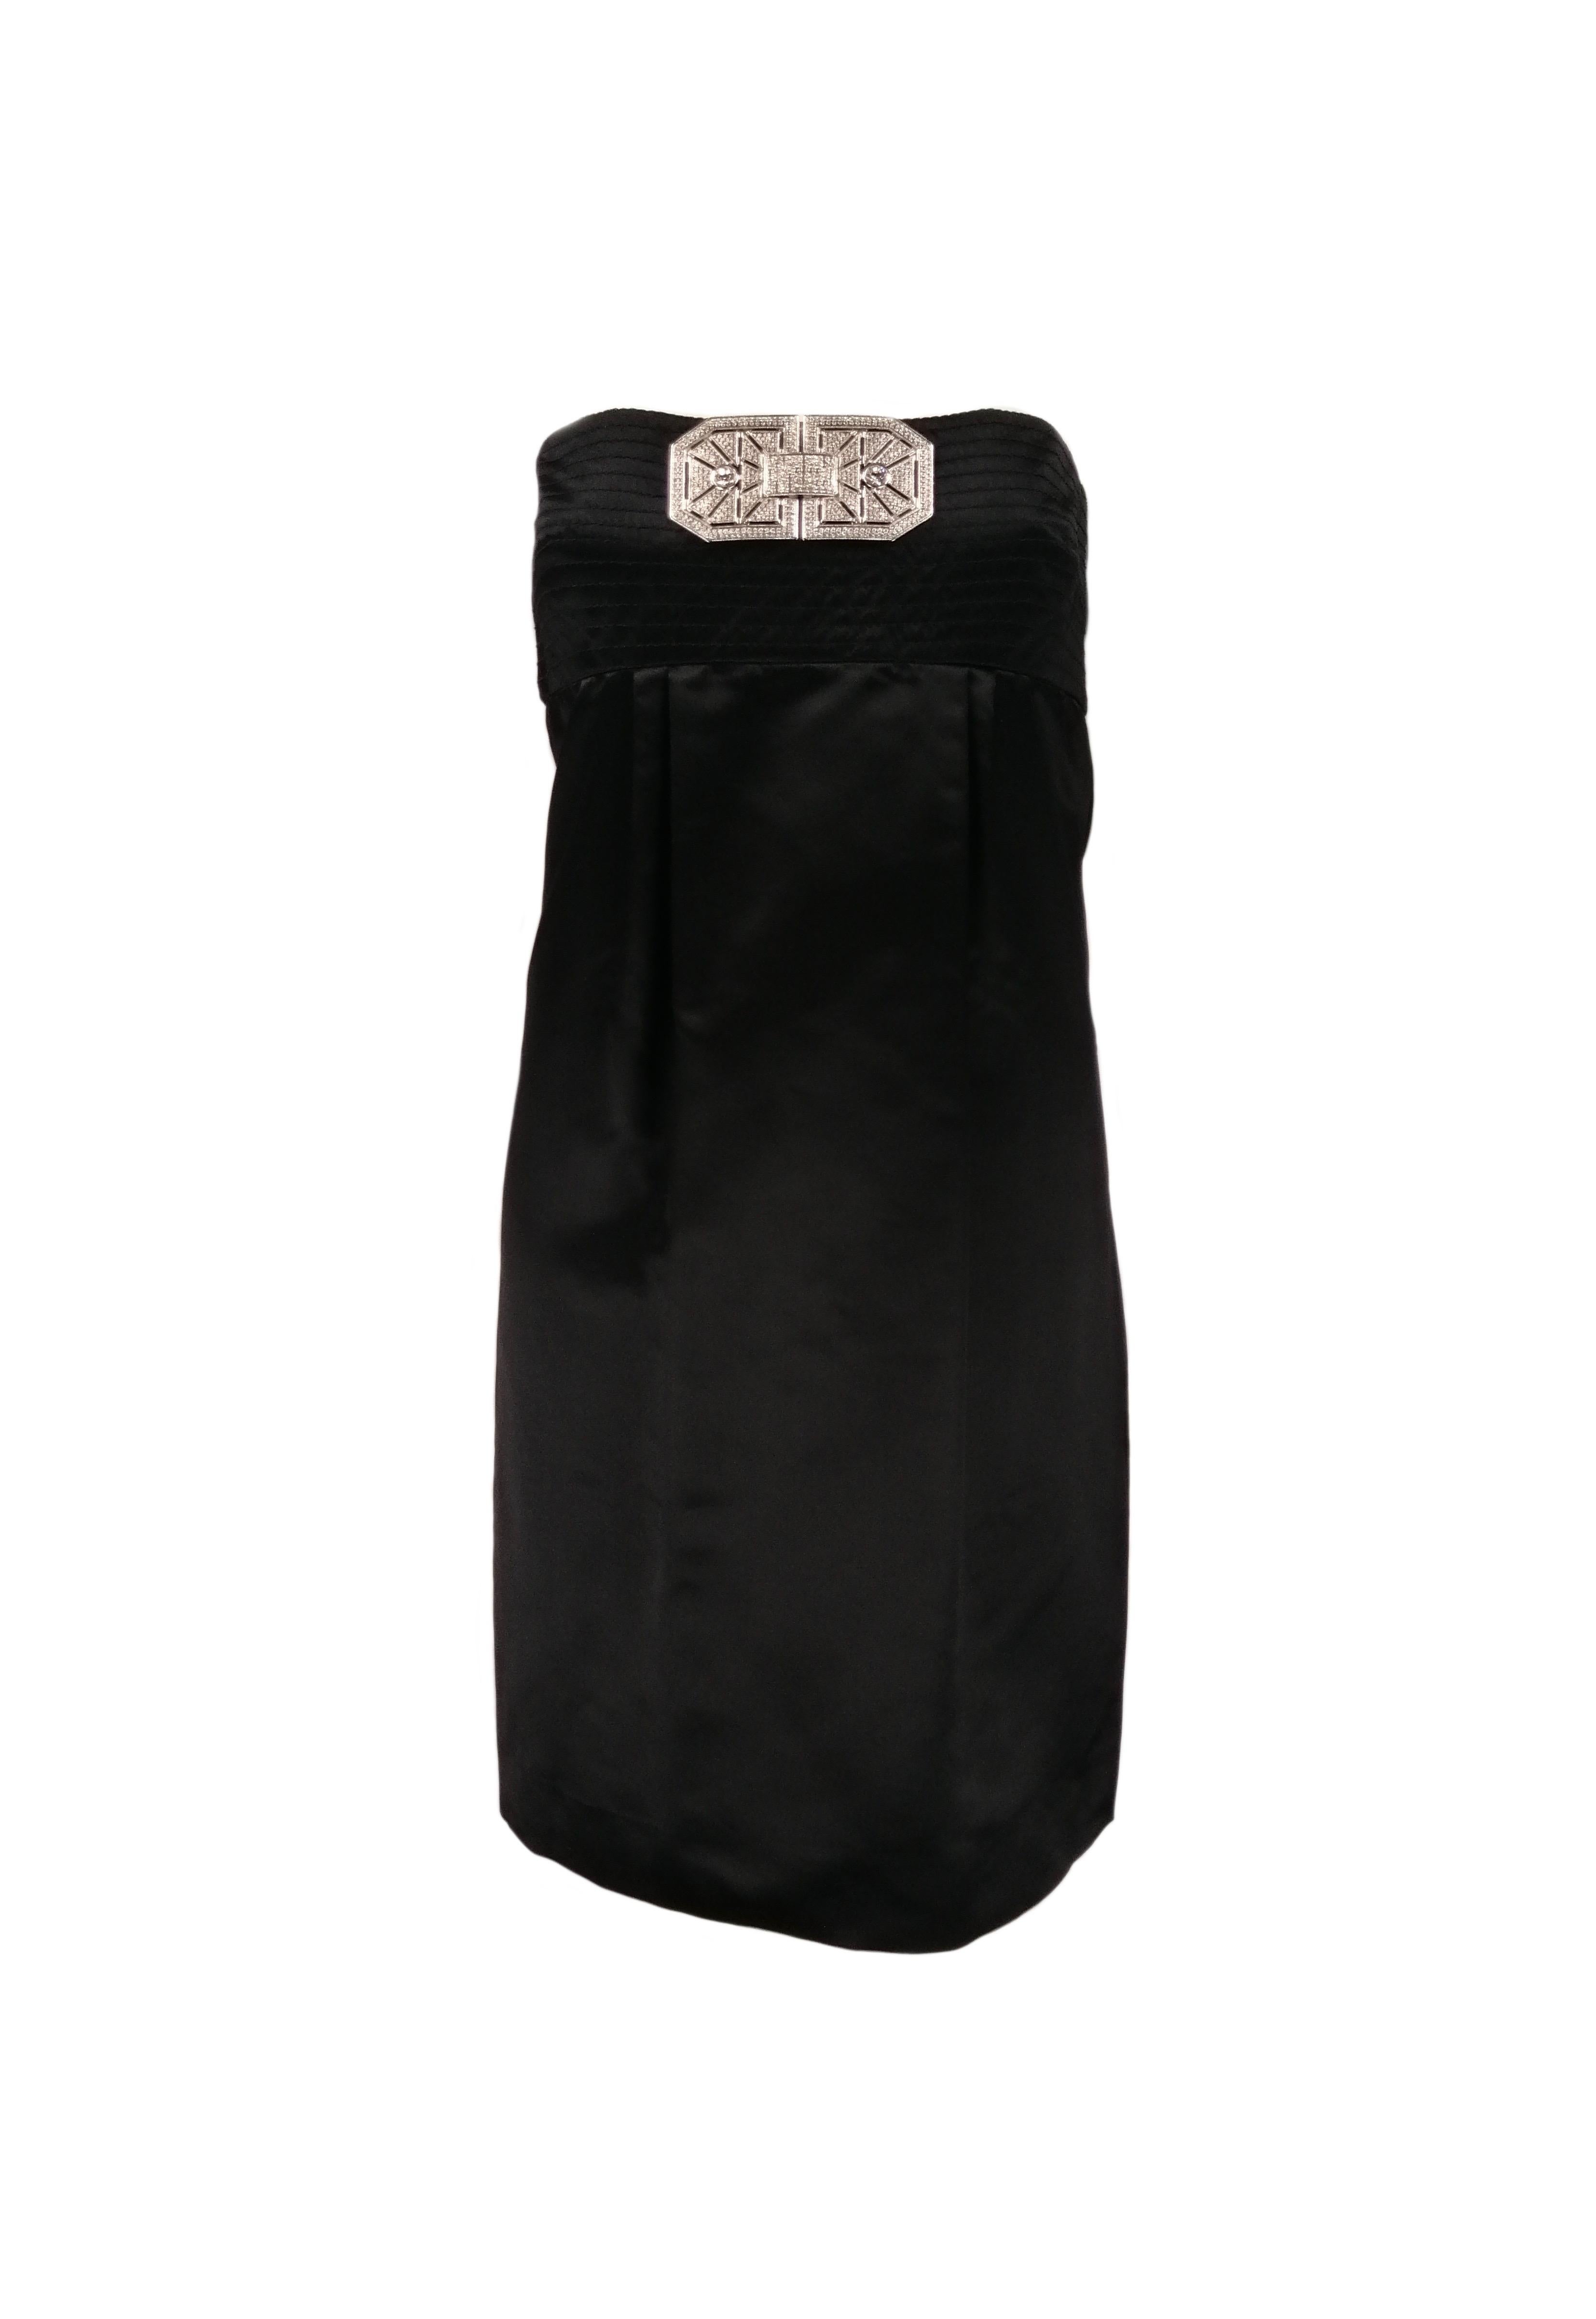 VALENTINO black silk satin dress
Strapeless dress, stitching on the bustier band, flowing sheath line. Large deco-inspired metal and white crystal ornament on the décolleté.
Size US 8
Made in Italy
Fabric: 59% acetat
            41% silk
Lining: